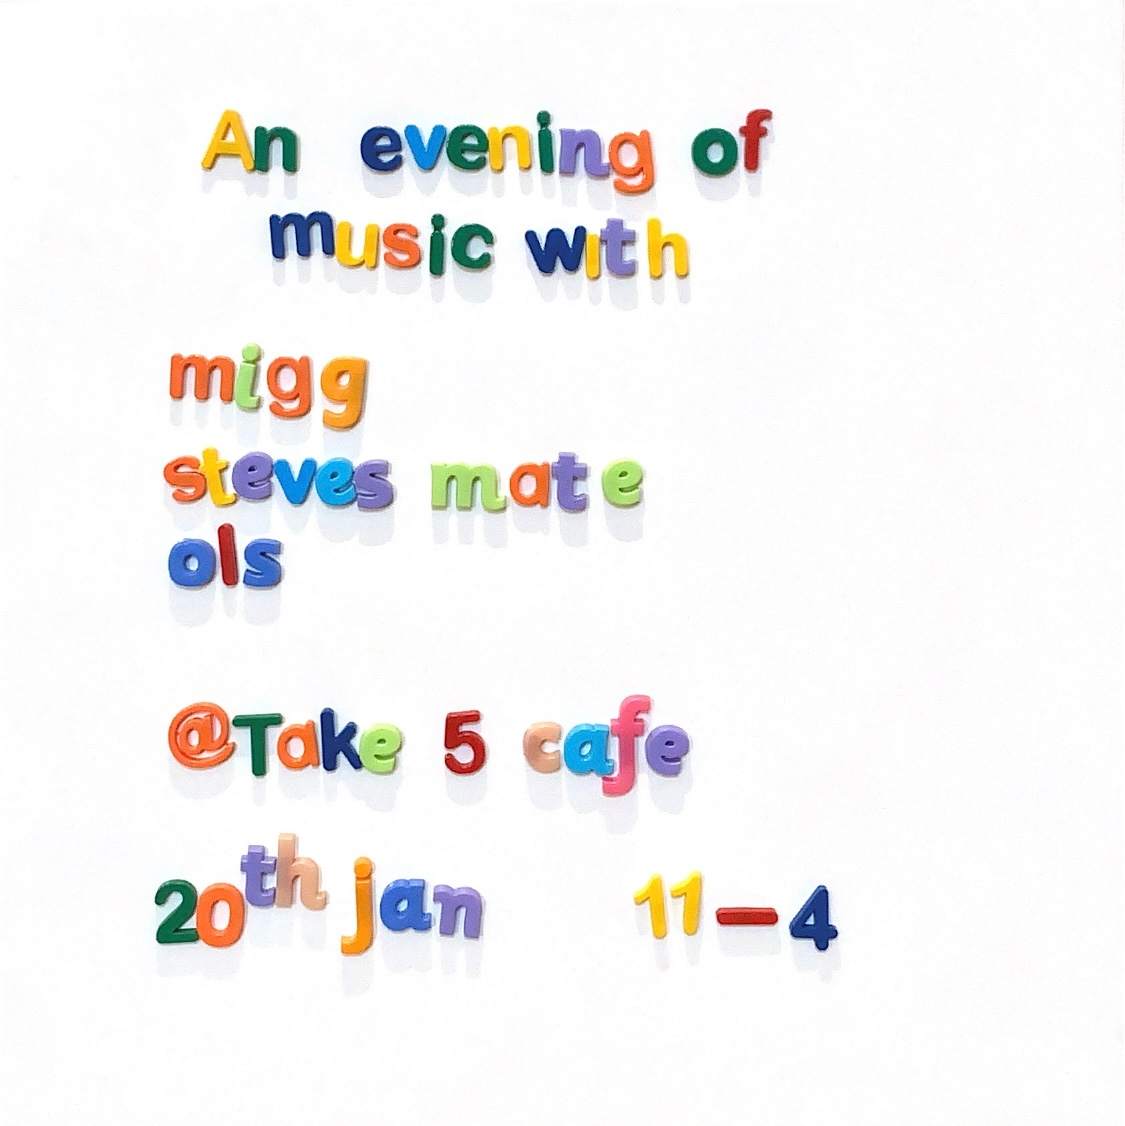 [CANCELLED] An evening of music with Migg, Steve's Mate & ols - フライヤー表